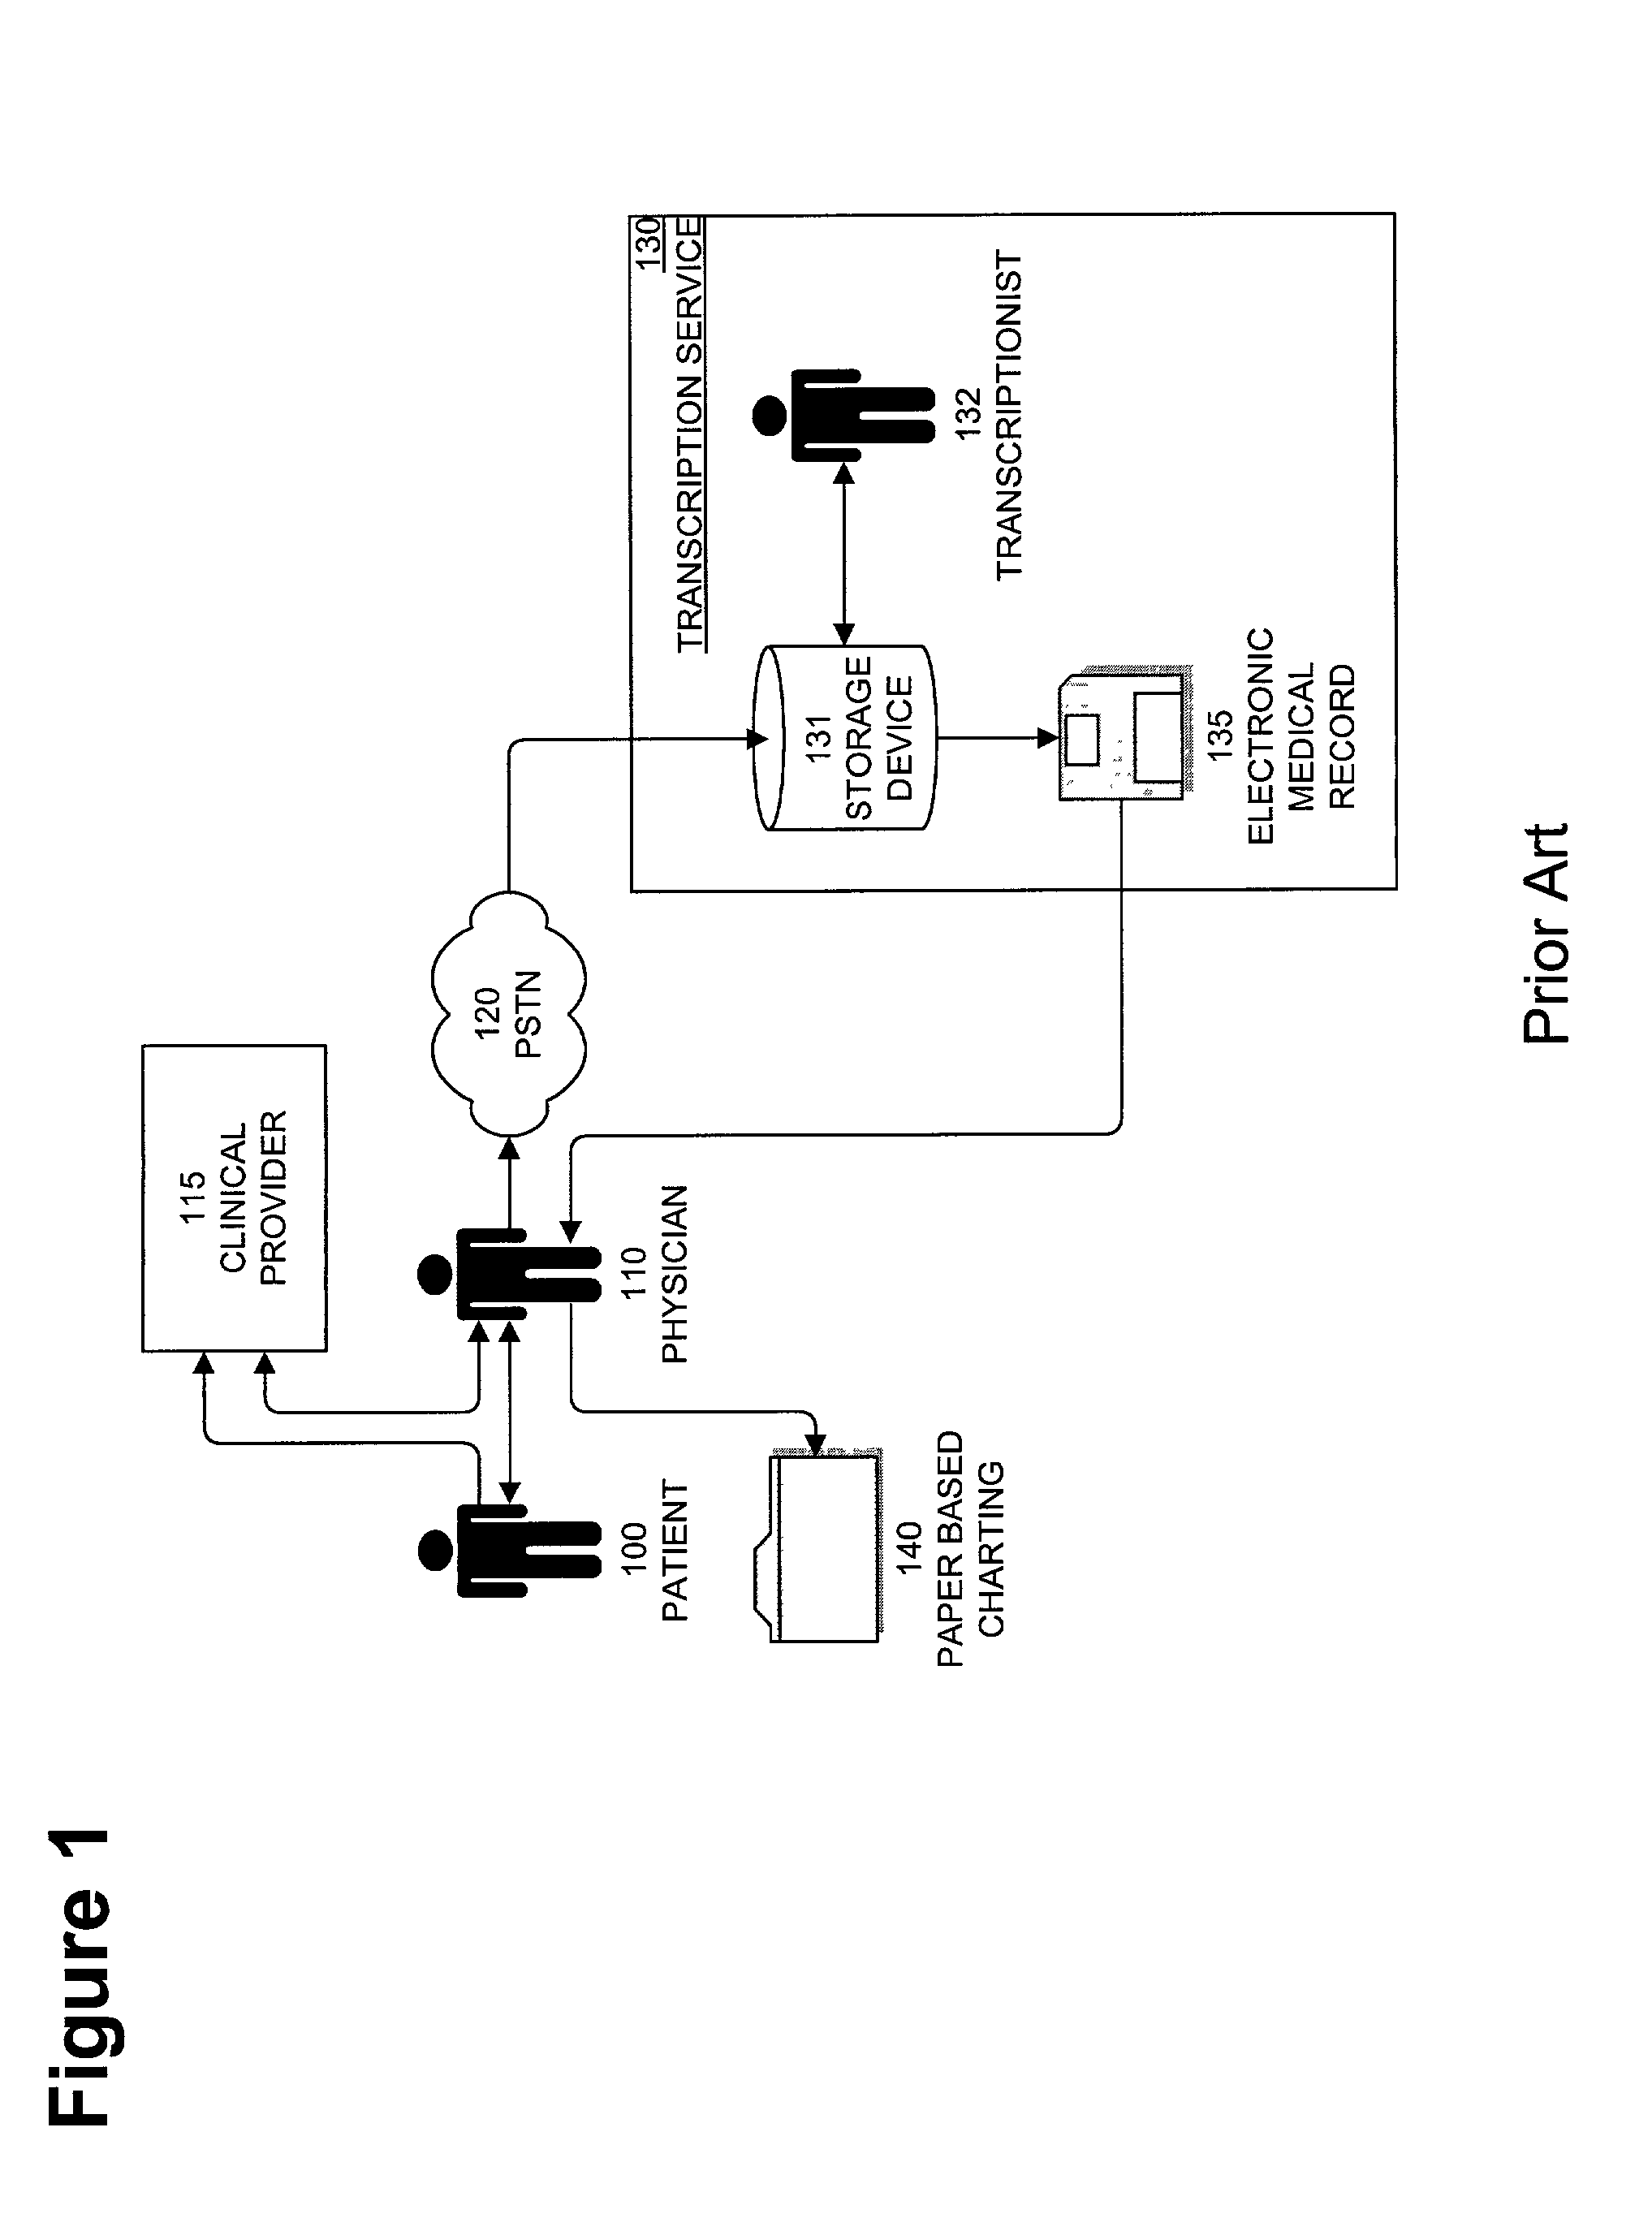 System, method, and apparatus for storing, retrieving, and integrating clinical, diagnostic, genomic, and therapeutic data